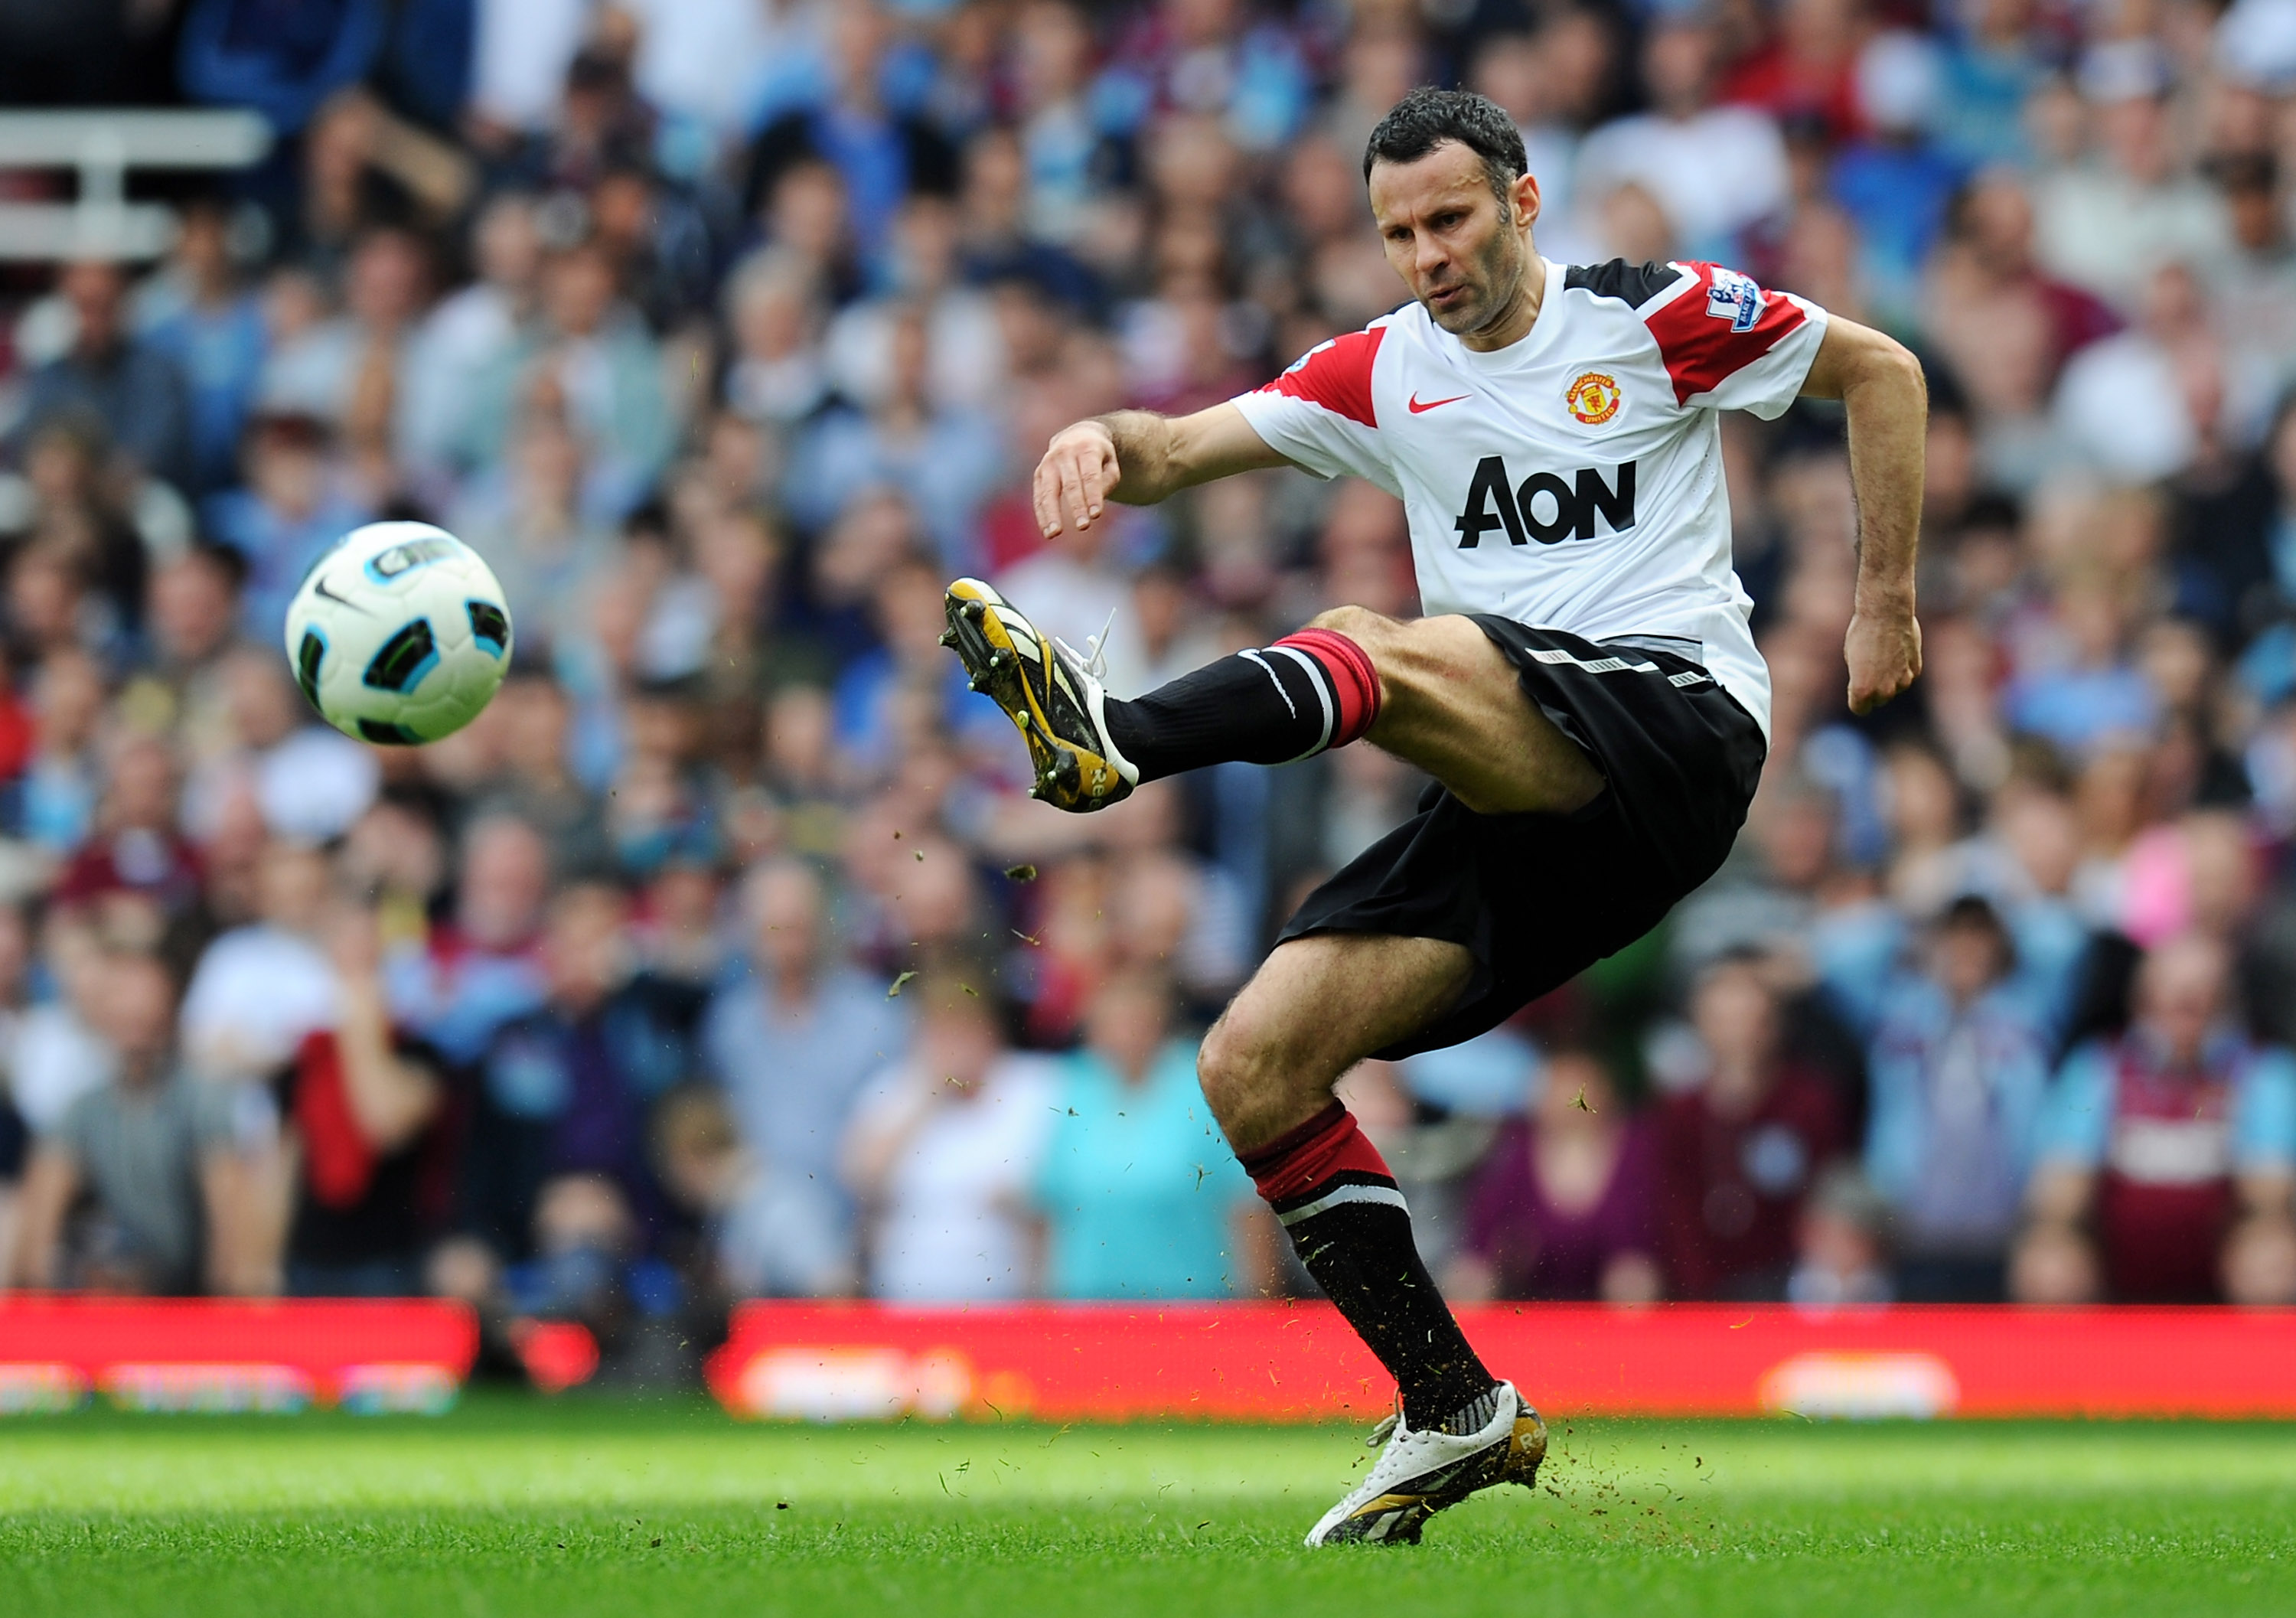 LONDON, ENGLAND - APRIL 02:  Ryan Giggs of Manchester United in action during the Barclays Premier League match between West Ham United and Manchester United at the Boleyn Ground on April 2, 2011 in London, England.  (Photo by Mike Hewitt/Getty Images)